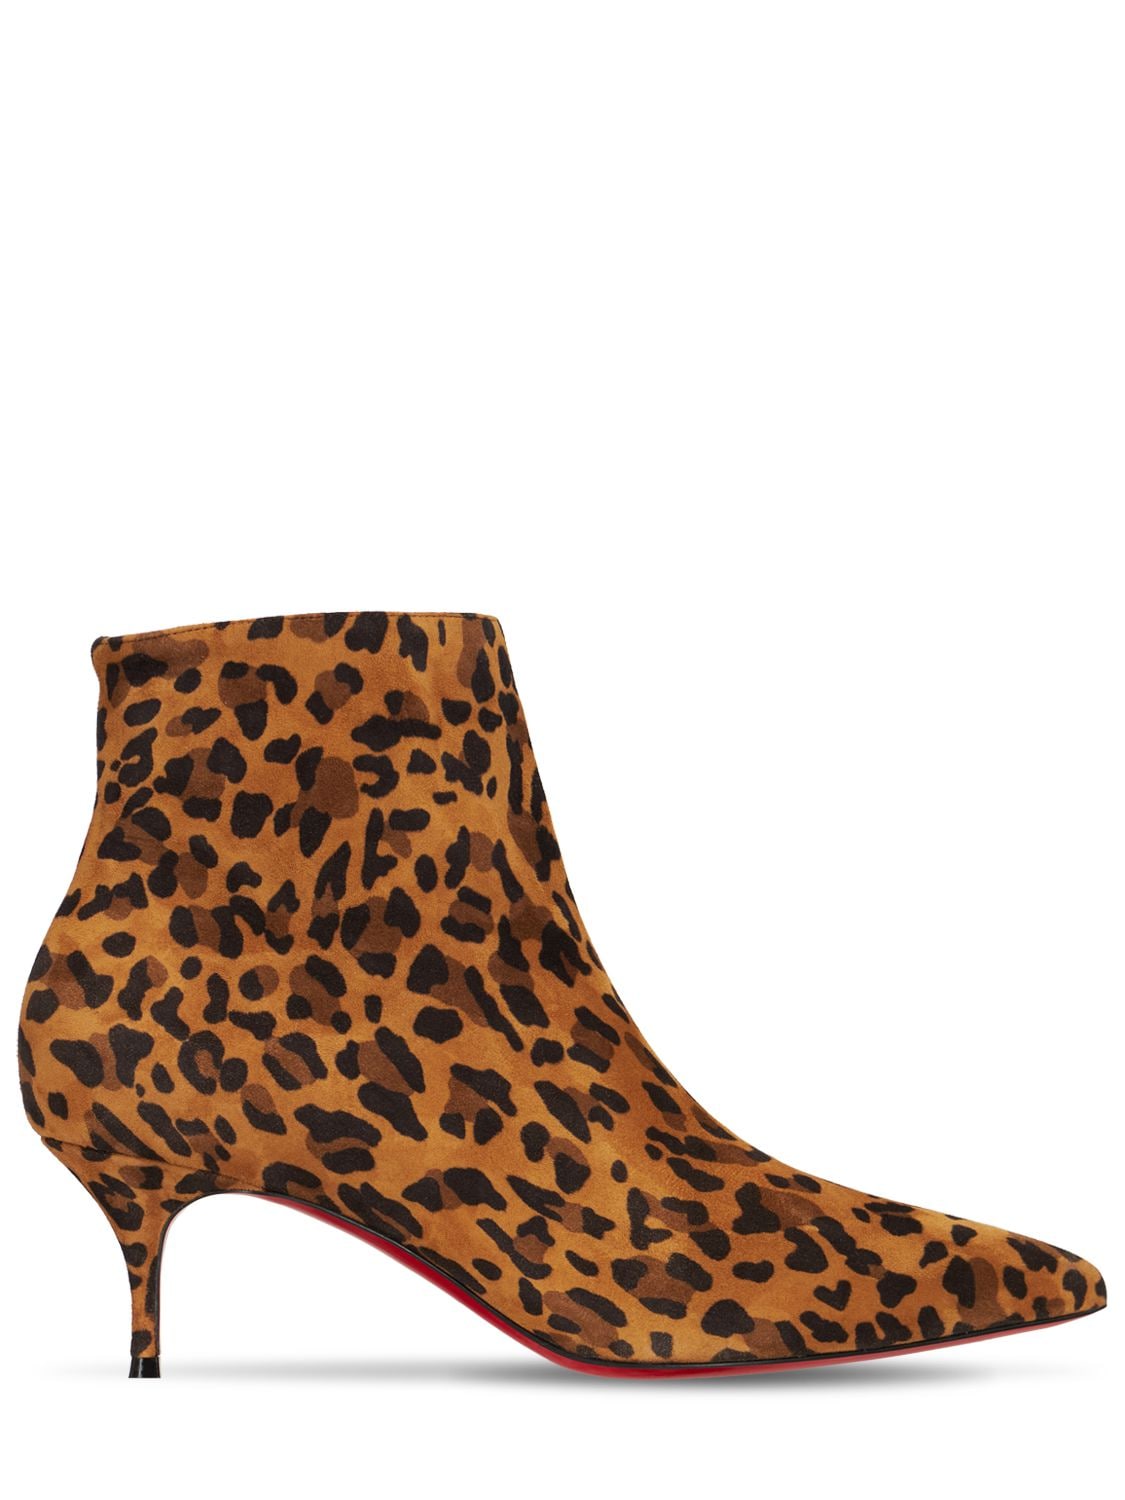 55mm Exclusive So Kate Print Suede Boots